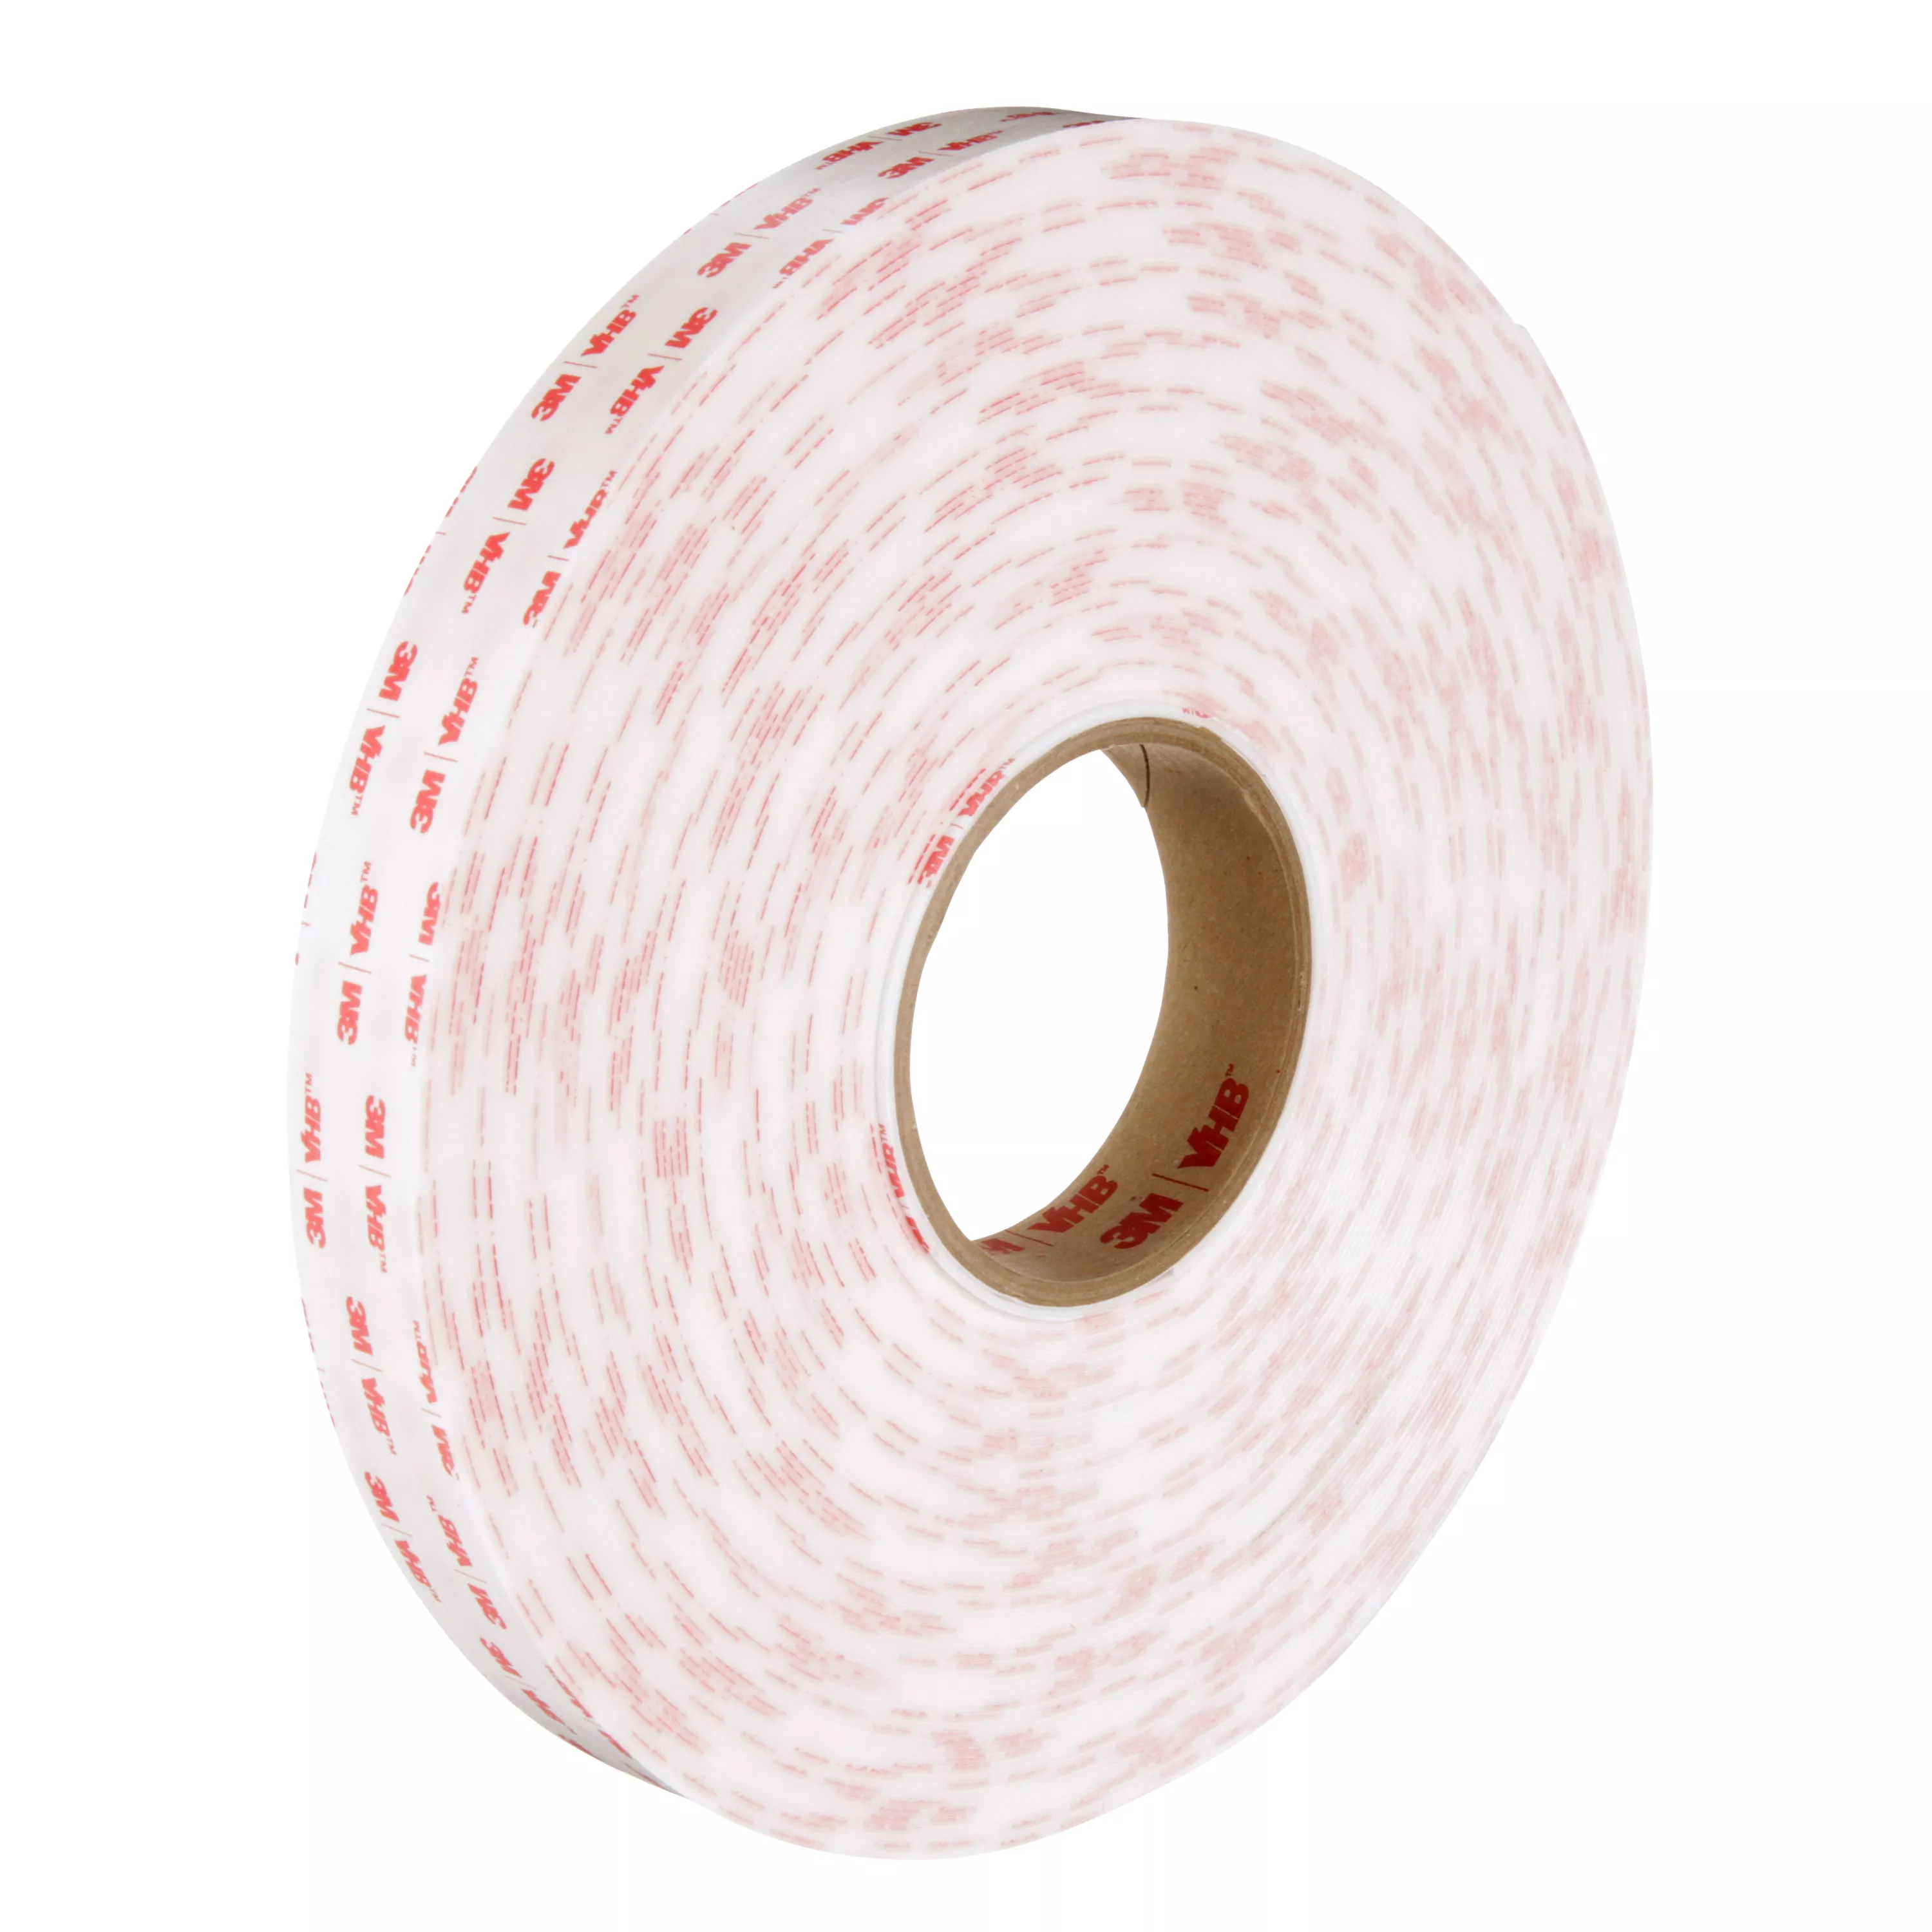 Product Number 4950 | 3M™ VHB™ Tape 4950